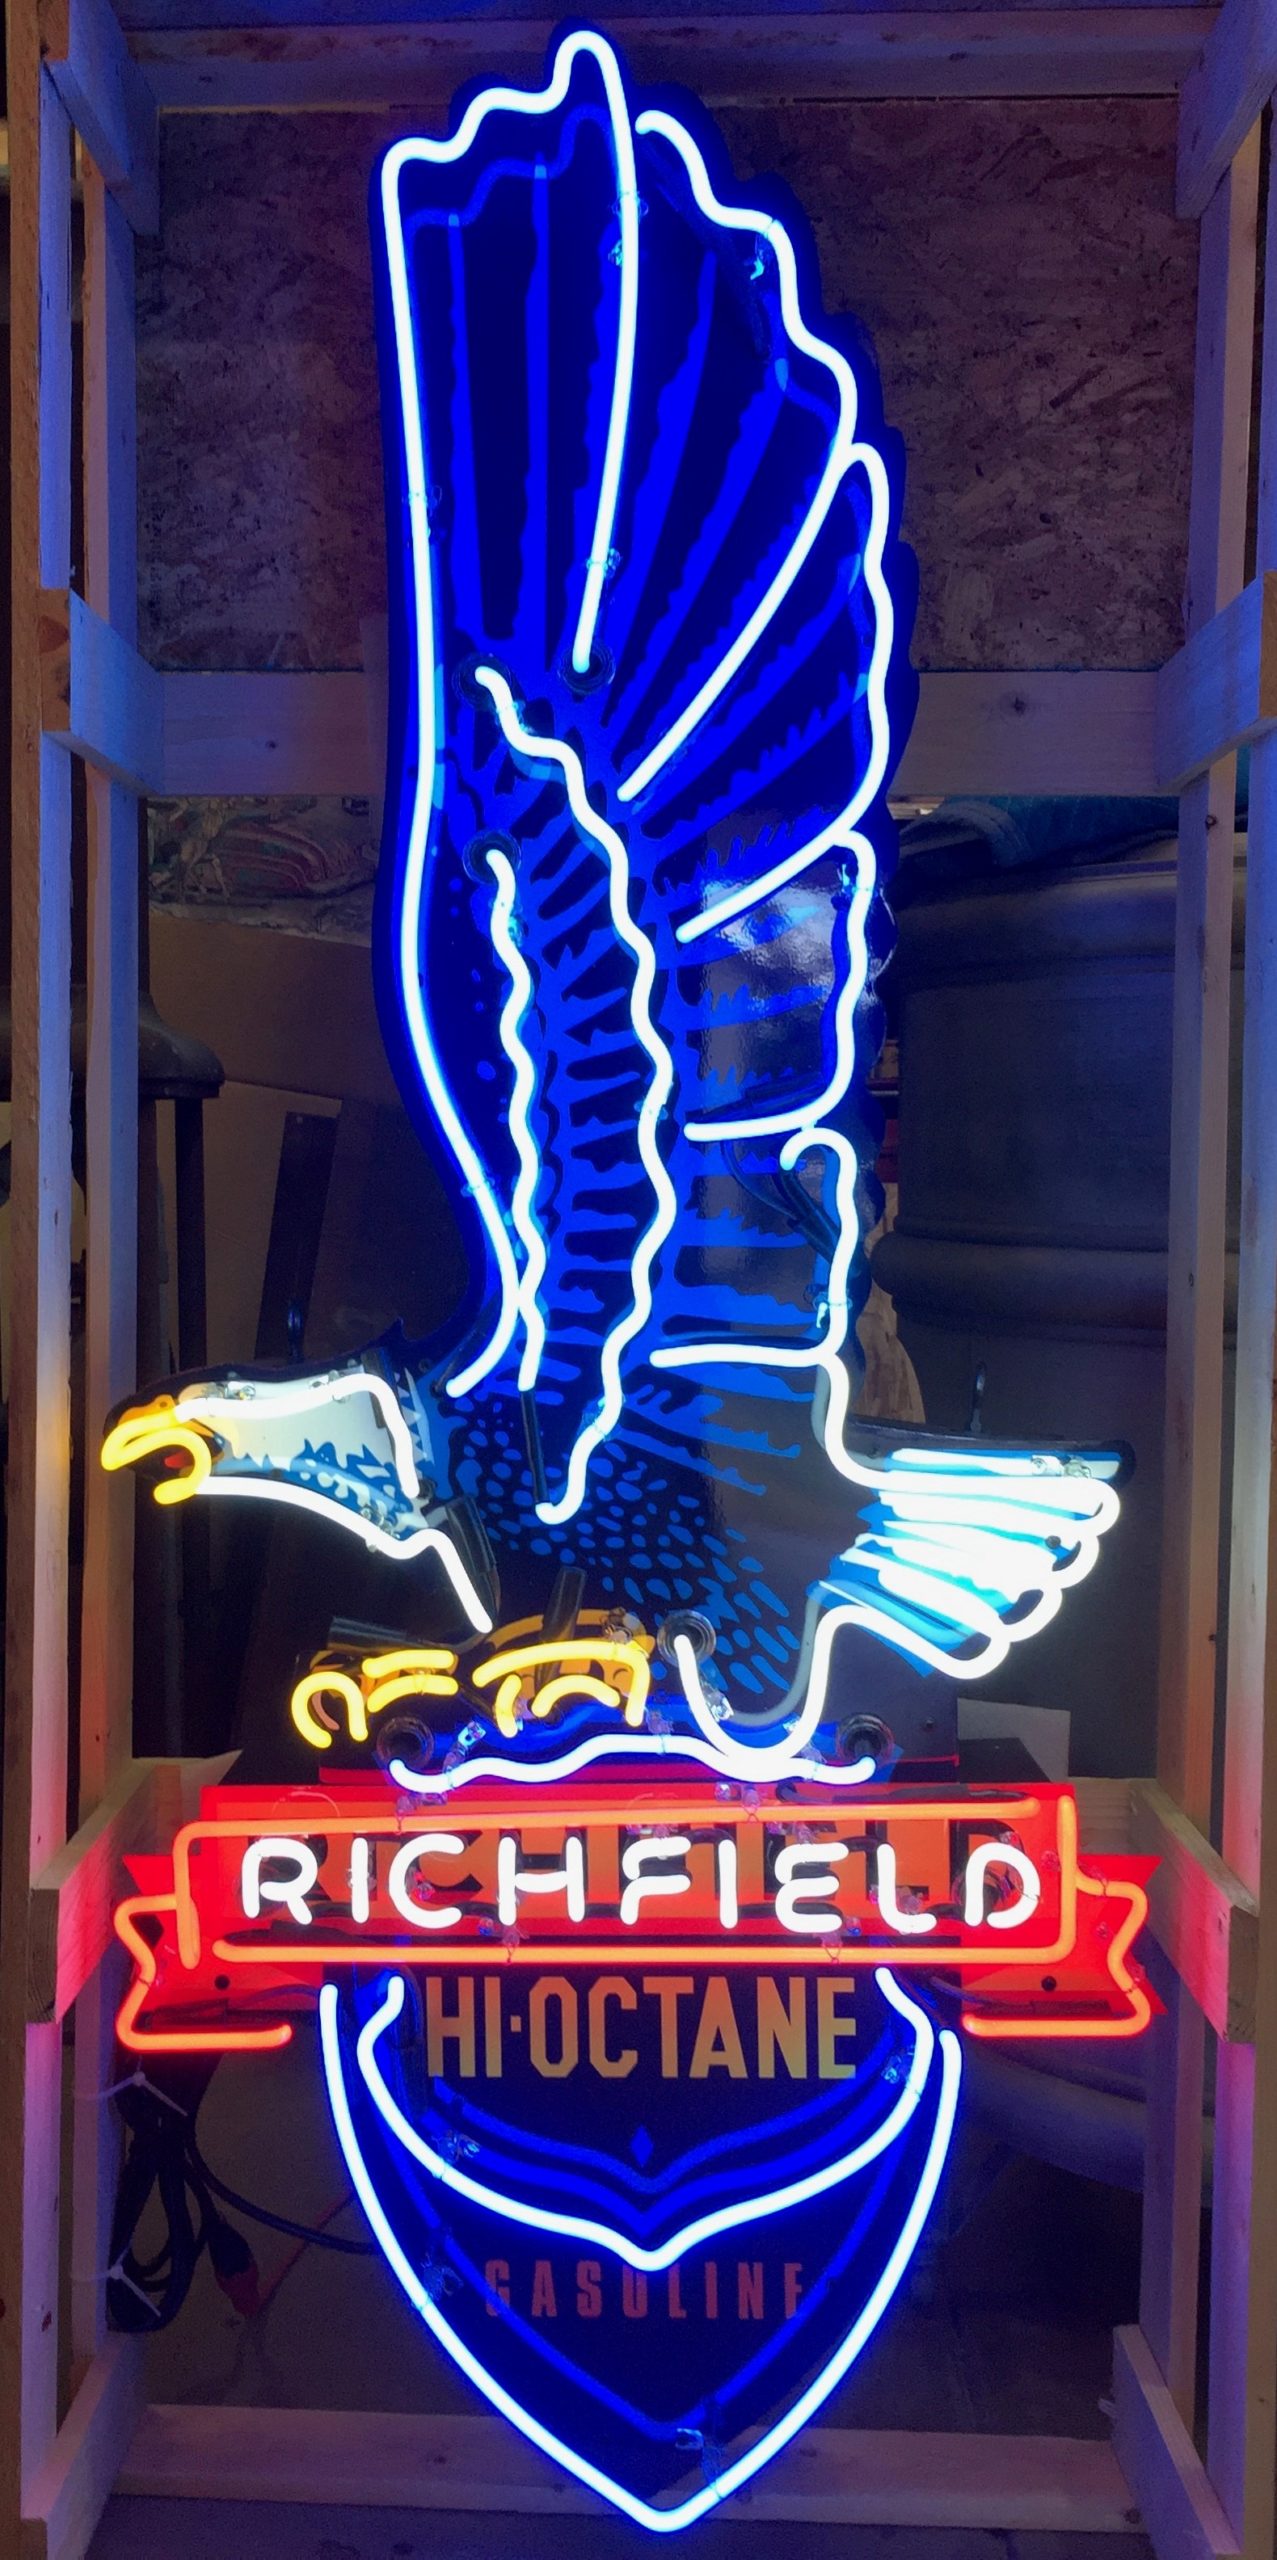 65" Richfield Eagle Hi Octane Gasoline Neon Sign Made In The Usa